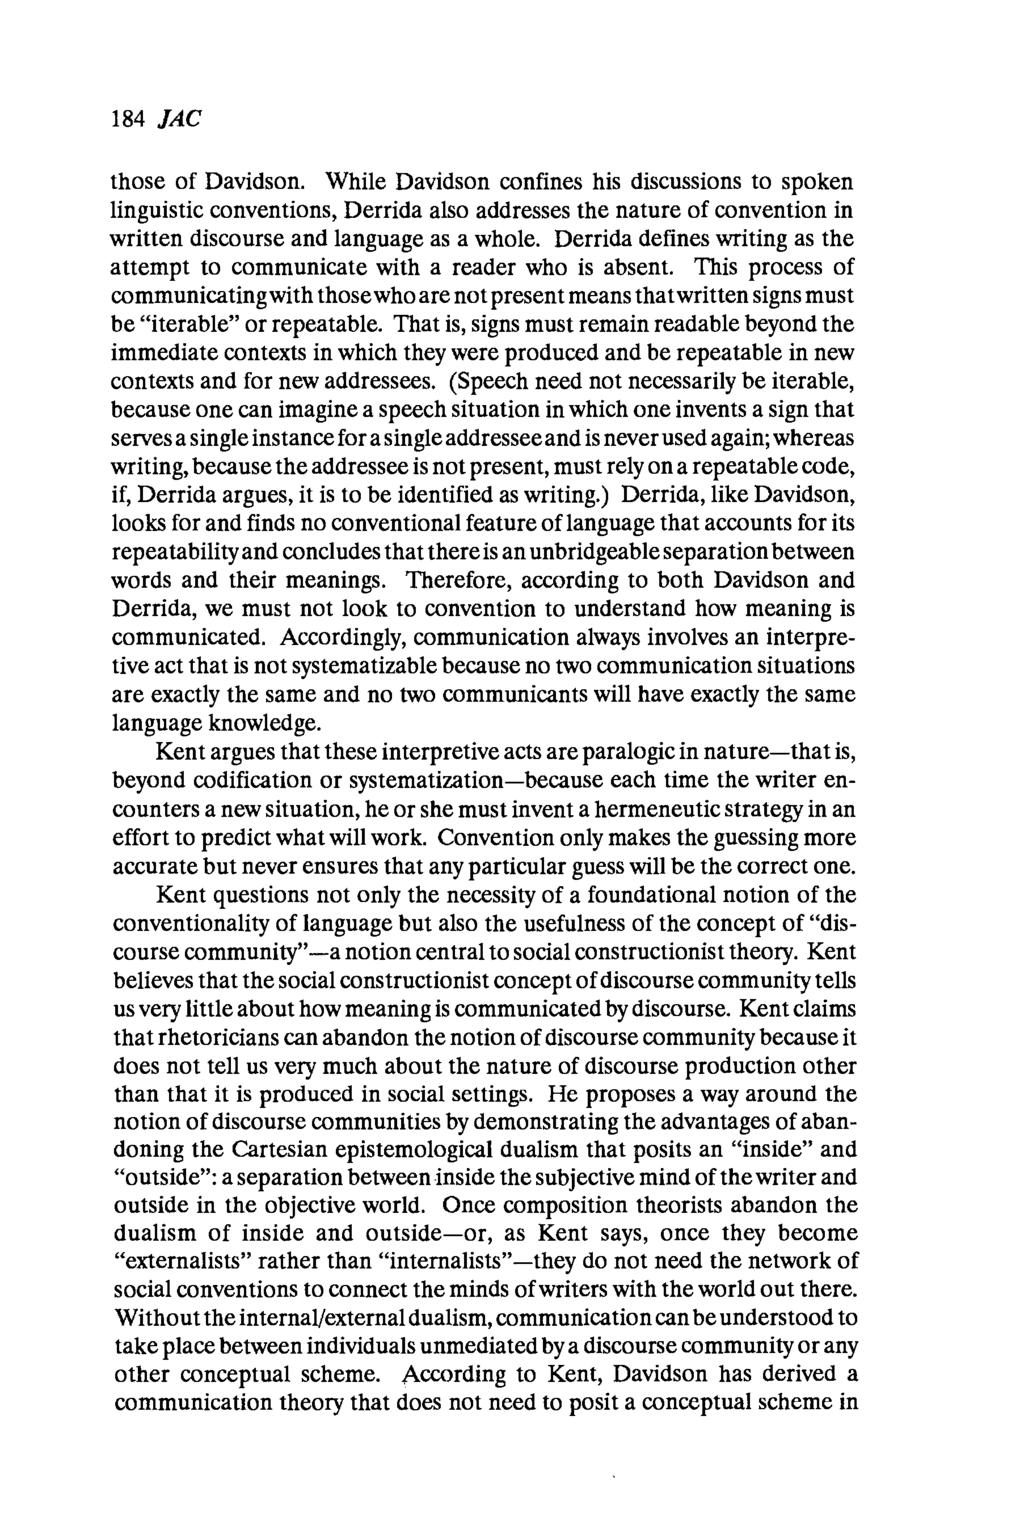 184 JAC those of Davidson. While Davidson confines his discussions to spoken linguistic conventions, Derrida also addresses the nature of convention in written discourse and language as a whole.